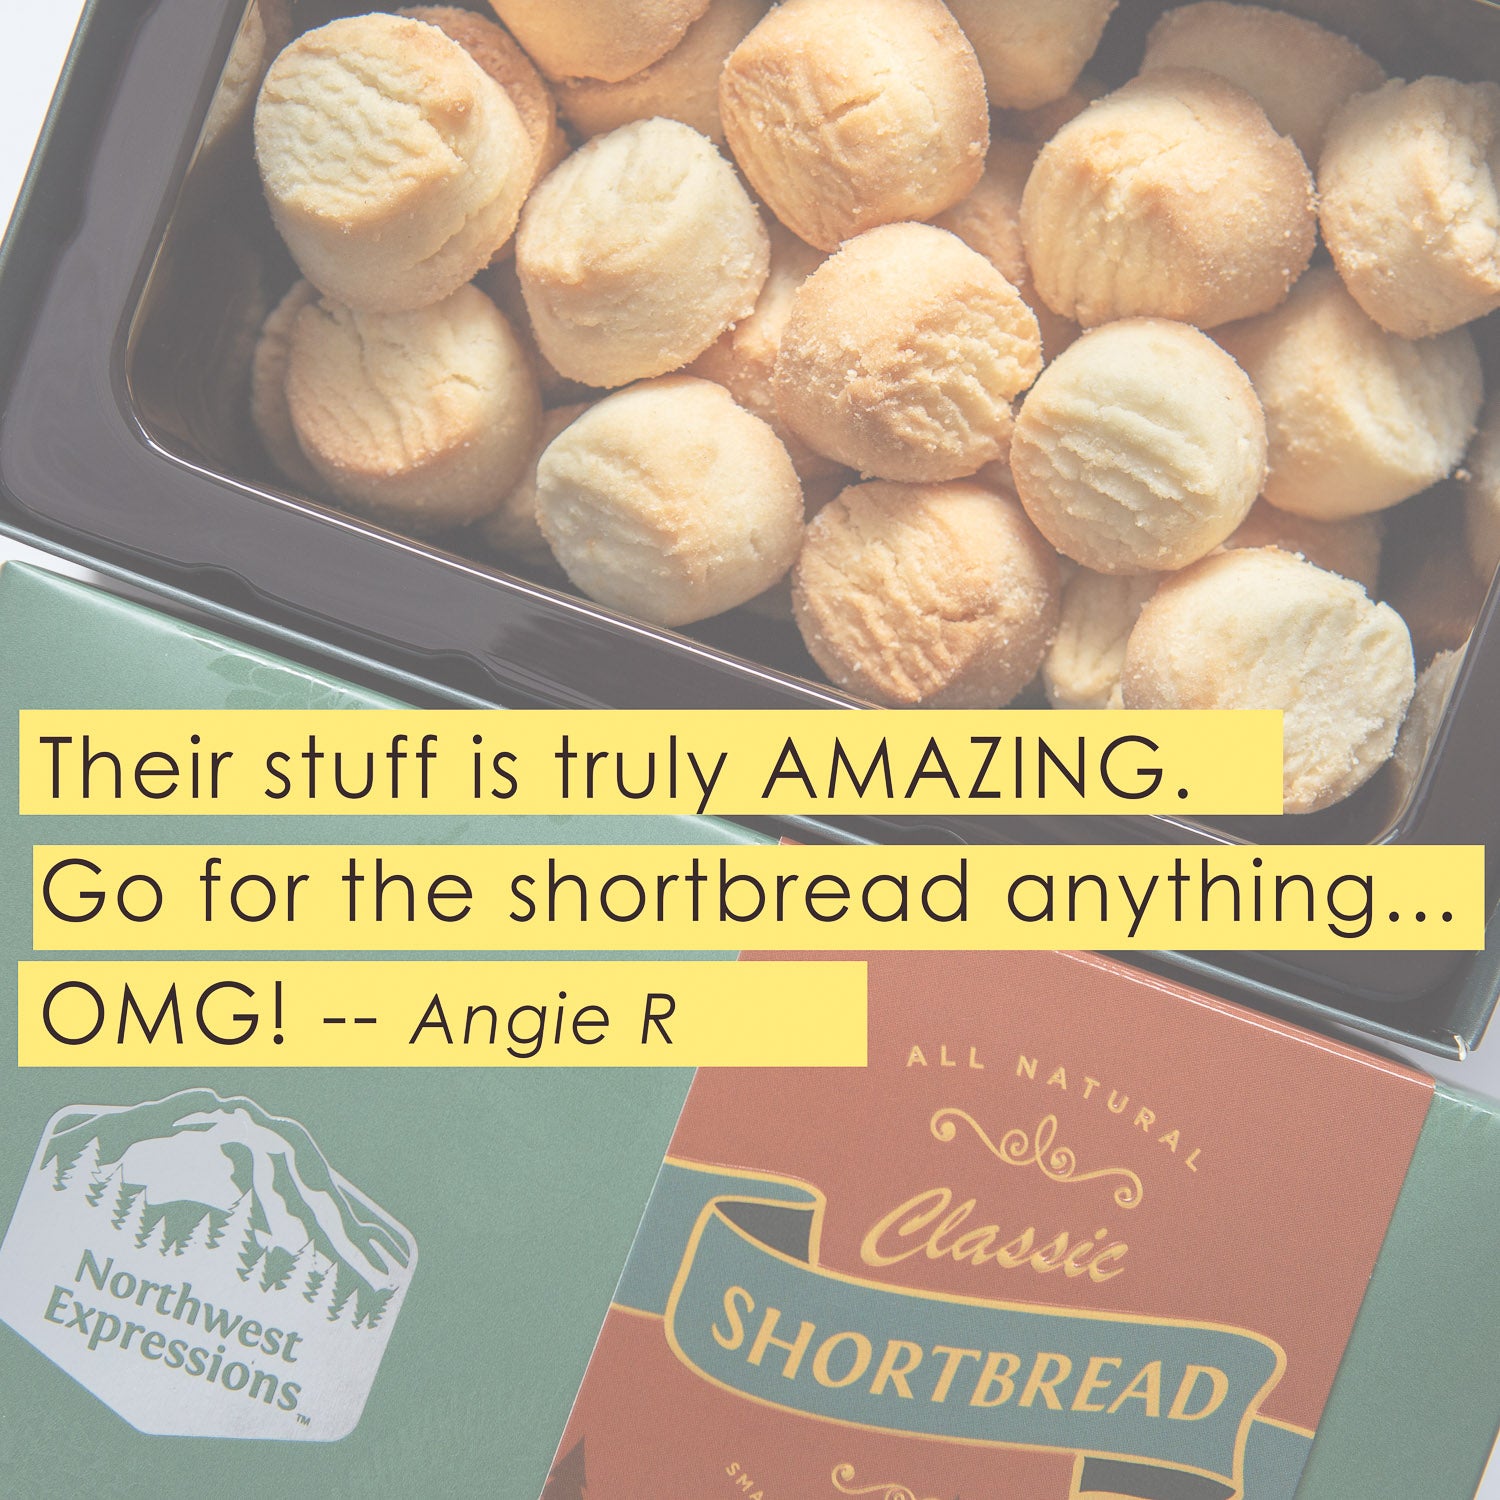 one reviewer's favorable statement about northwest expressions shortbread cookies